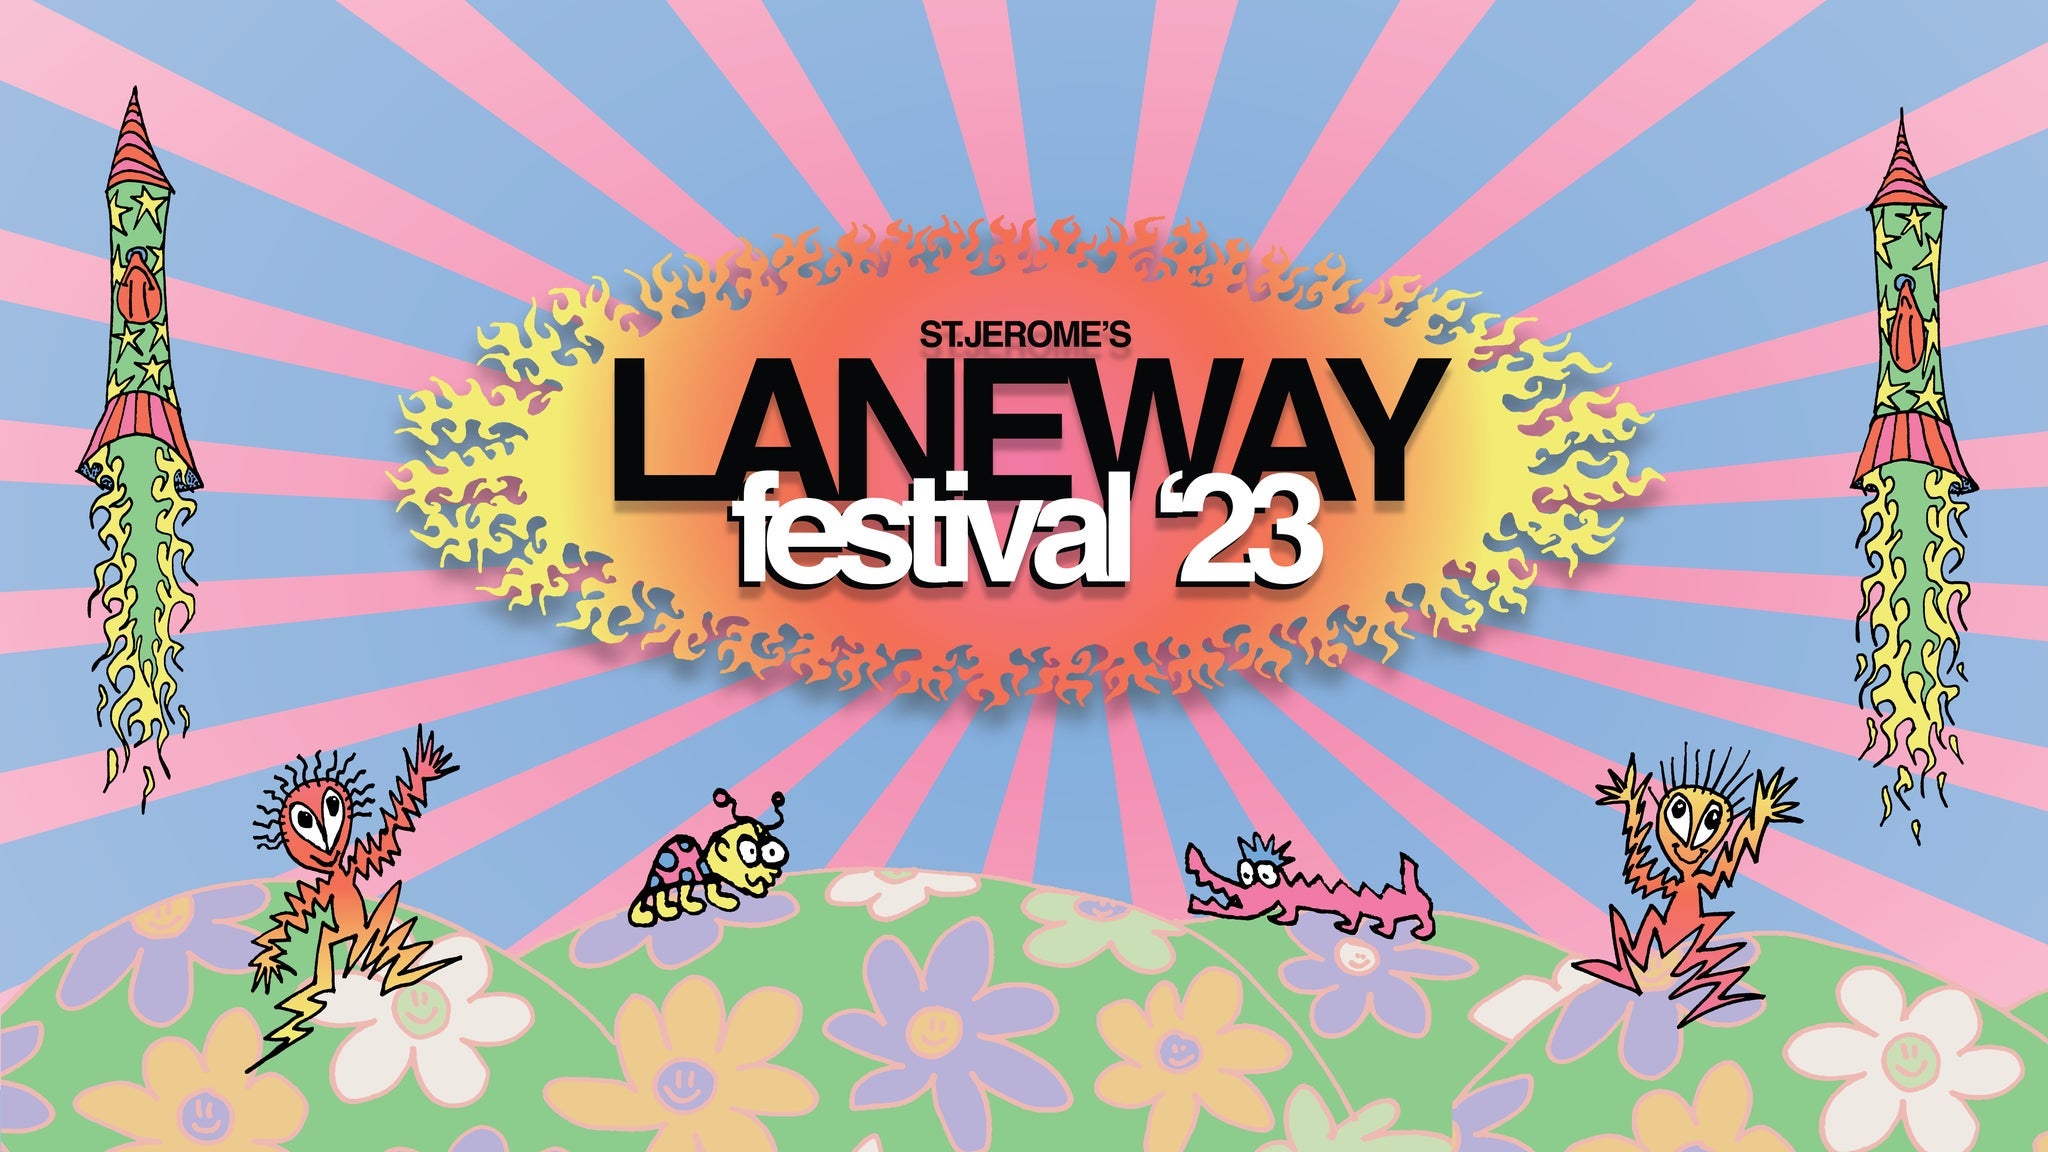 Image used with permission from Ticketmaster | St Jeromes Laneway Festival Auckland tickets